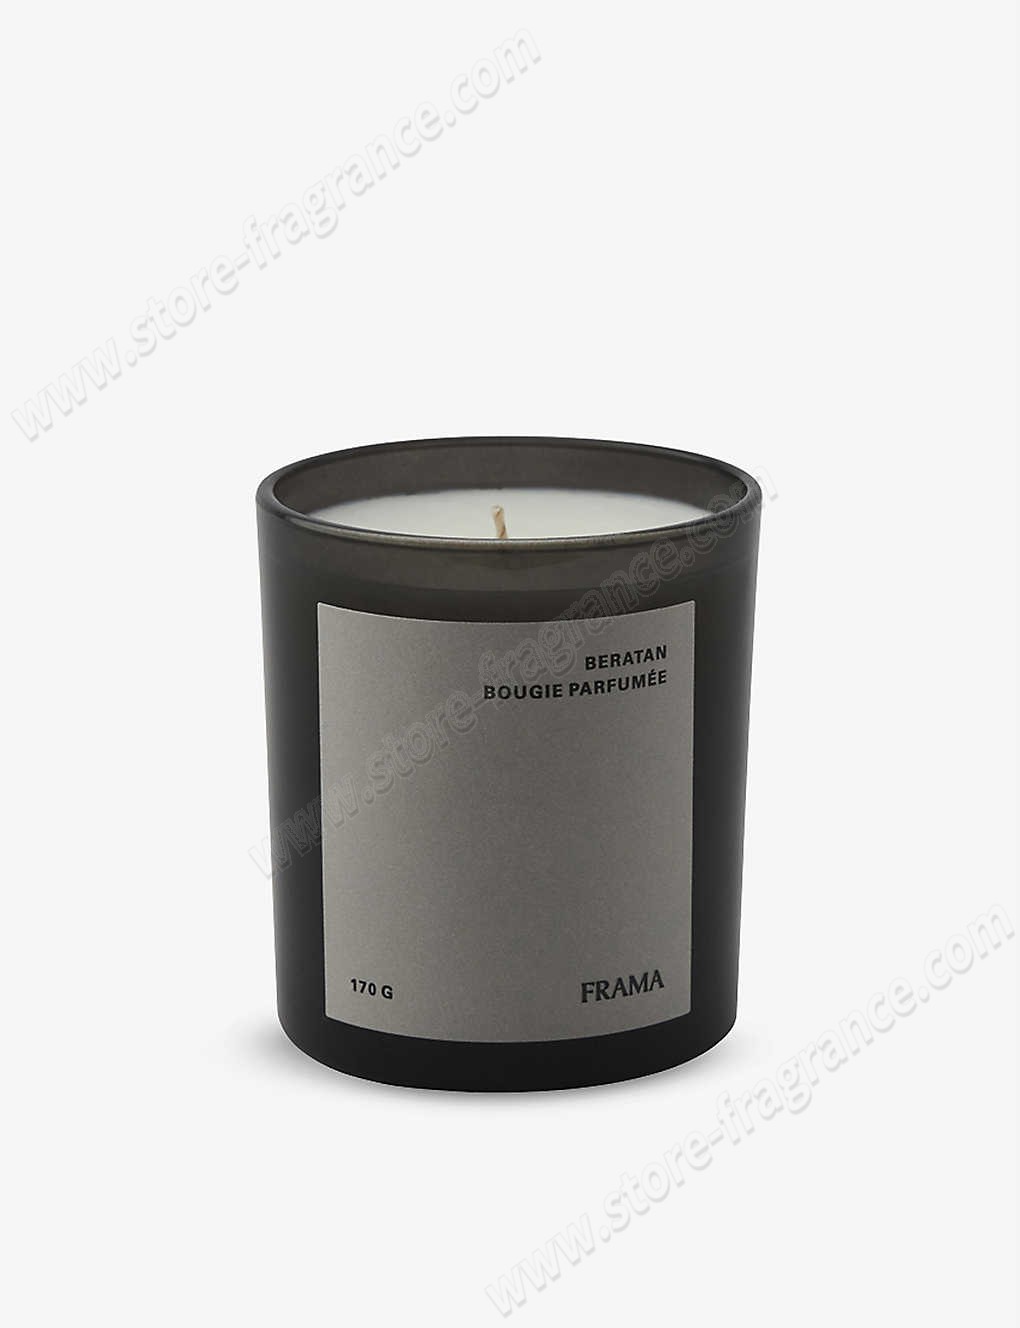 FRAMA/Beratan scented candle 170g ✿ Discount Store - FRAMA/Beratan scented candle 170g ✿ Discount Store